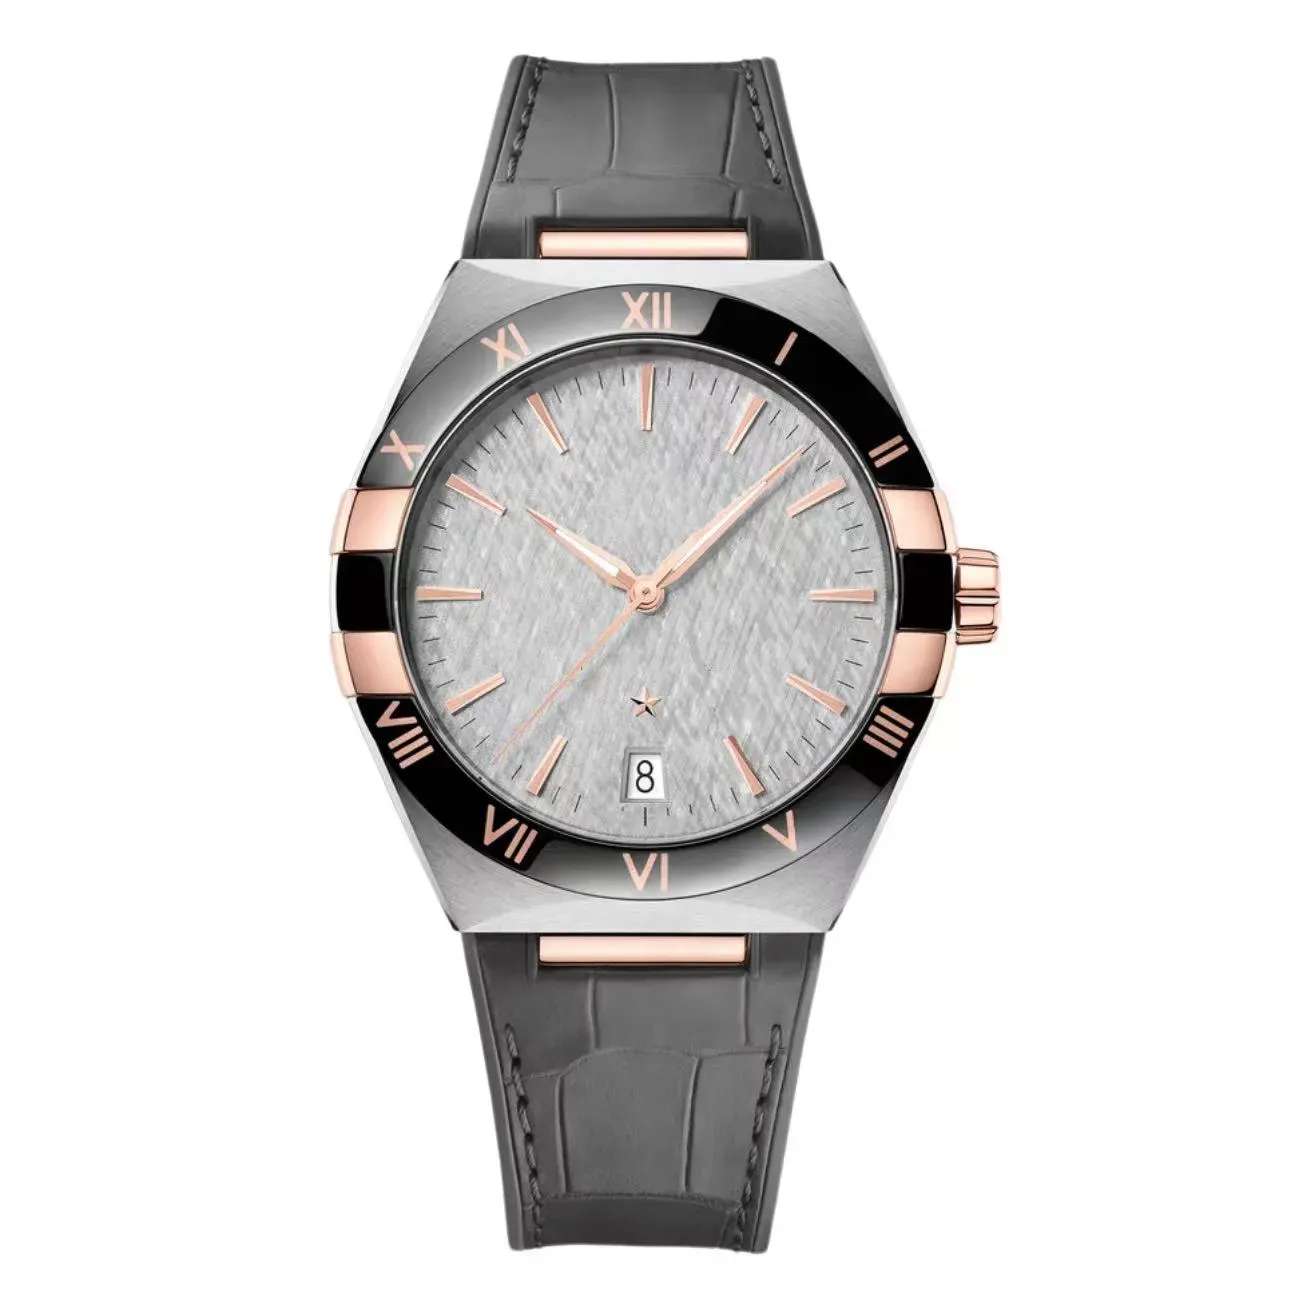 Business Casual High Quality Automatic 39mm Size Constellation Handsur Designer Watch Leather Waterproof Sapphire med AAA Watchbox Montre de Luxe